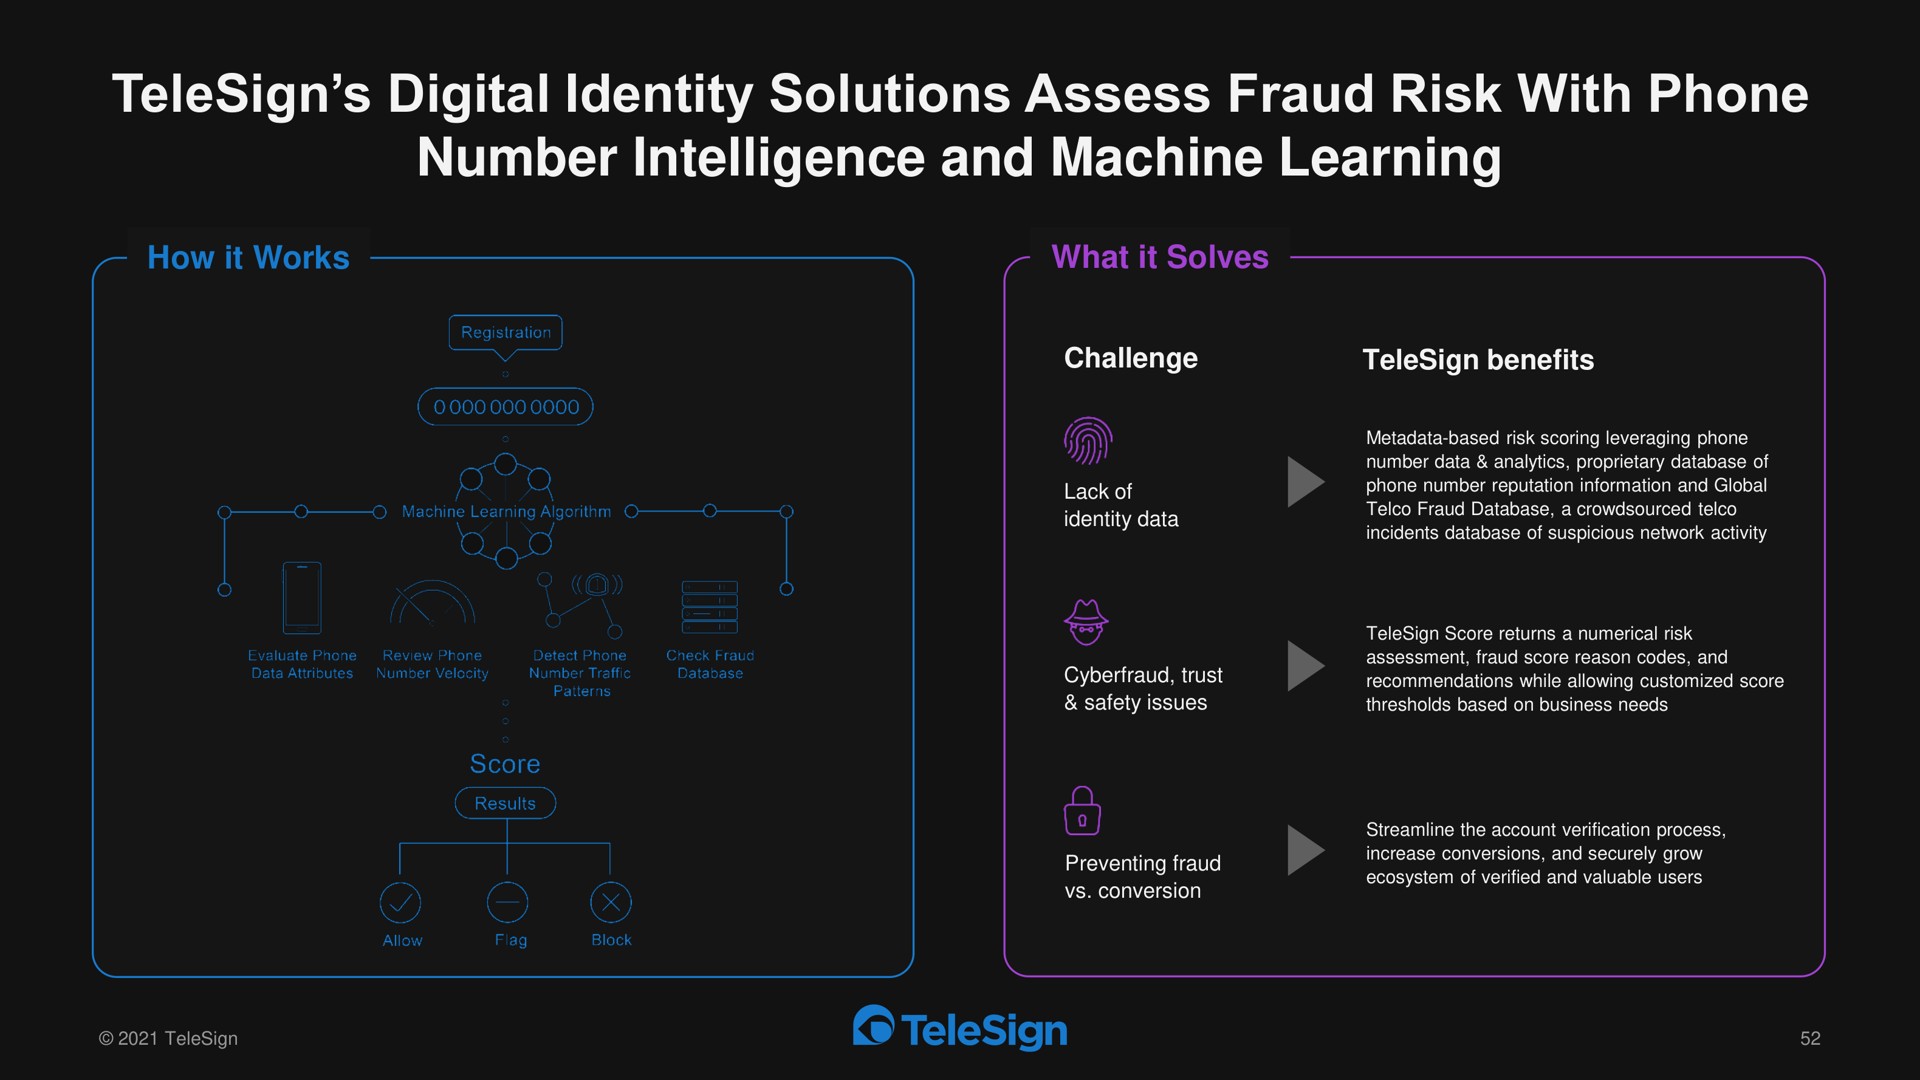 digital identity solutions assess fraud risk with phone number intelligence and machine learning | TeleSign